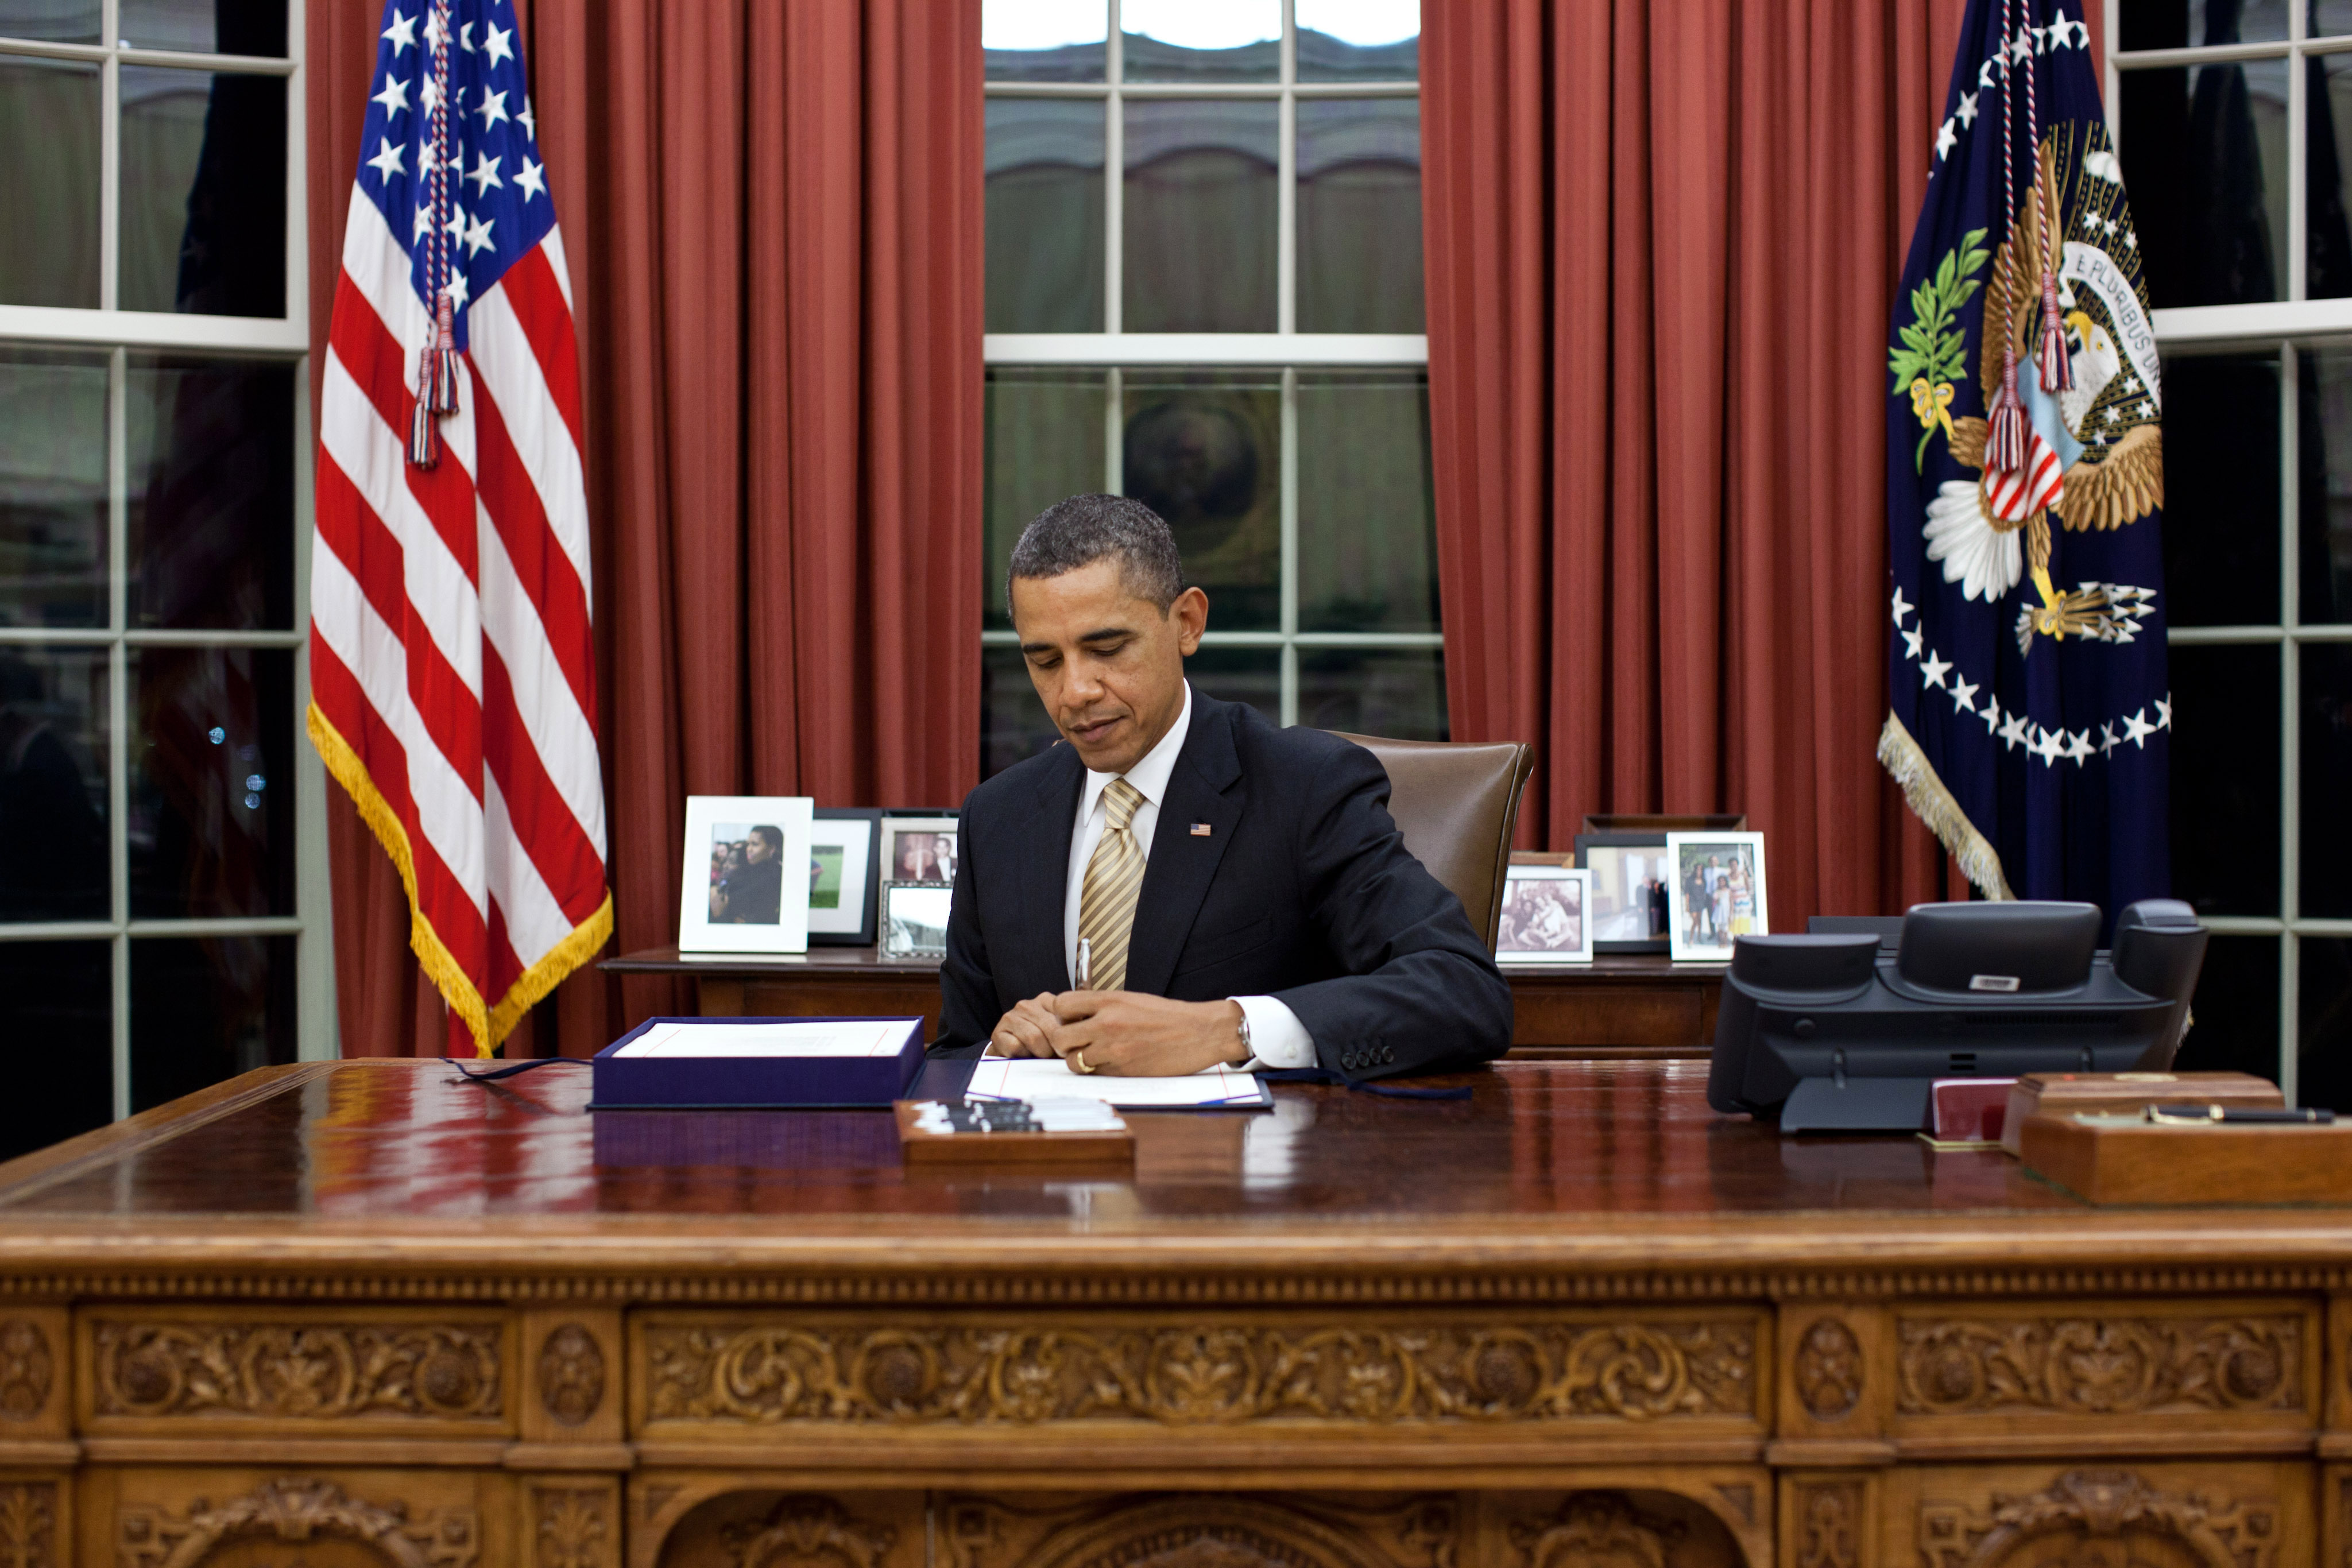 President Obama signs the payroll tax cut (February 22, 2012)